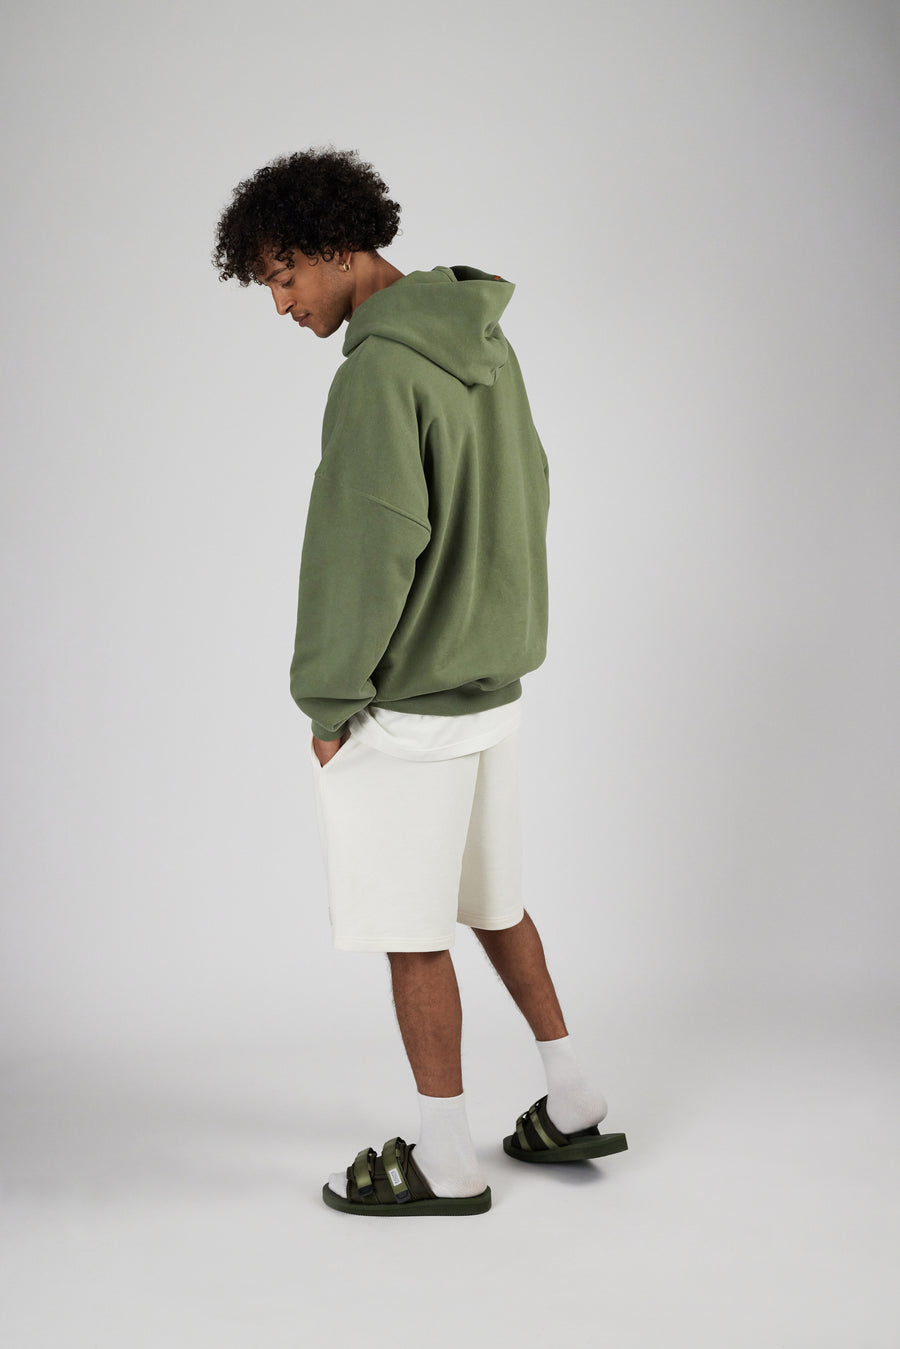 Backside view of a man wearing sweatshorts in color eggnog and oversized hoodie in color sage green